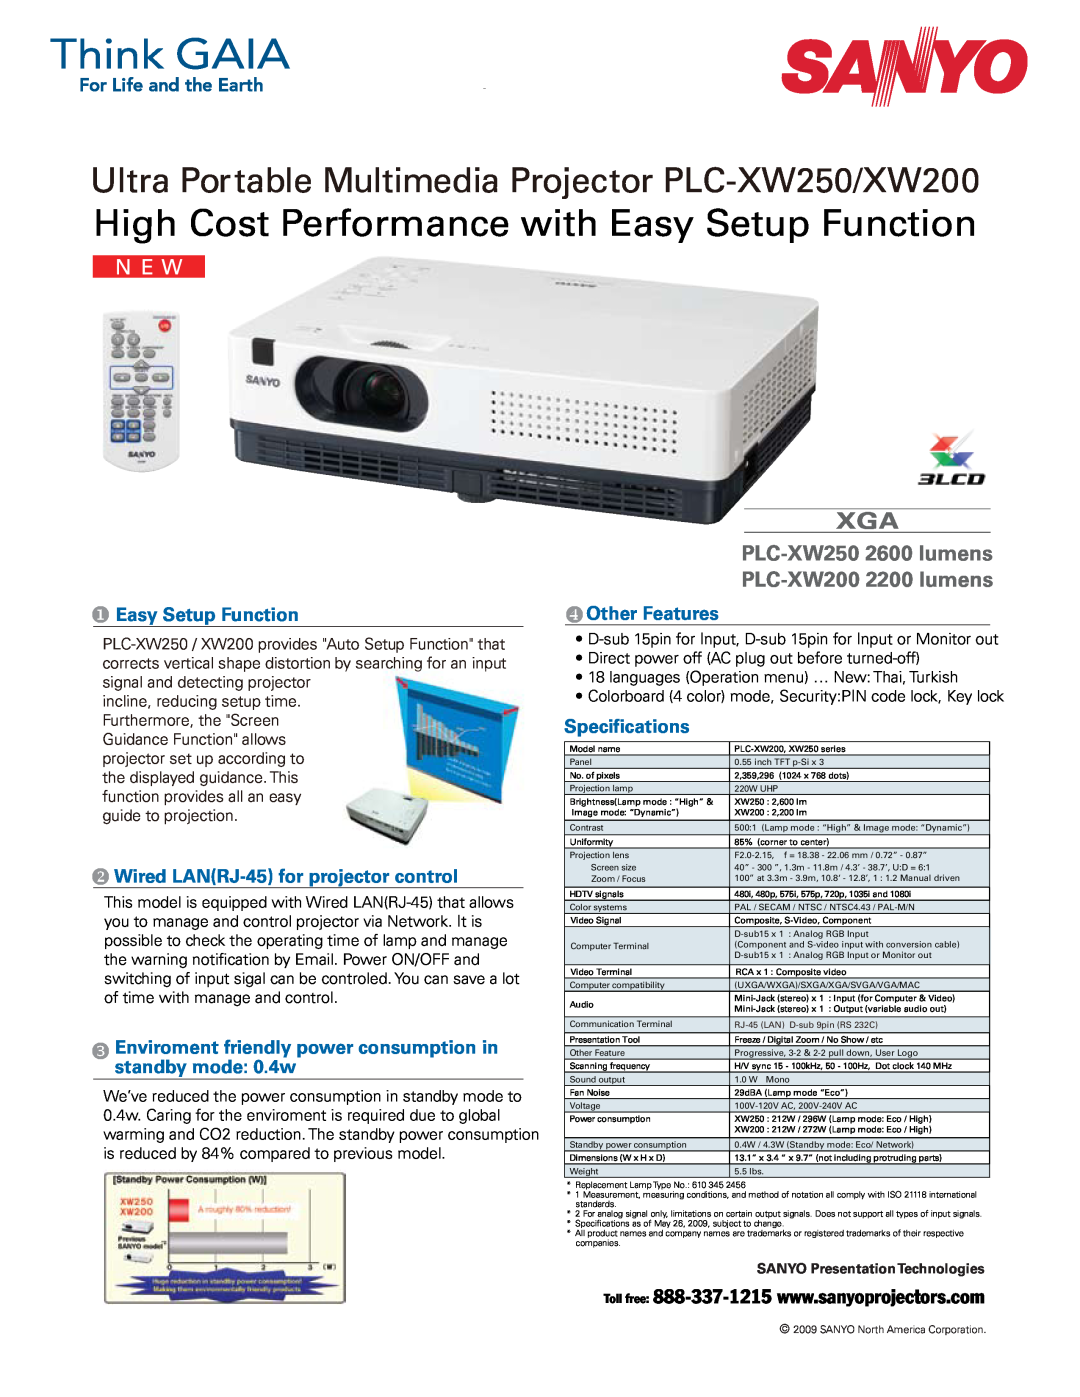 Sanyo specifications High Cost Performance with Easy Setup Function, PLC-XW2502600 lumens PLC-XW2002200 lumens 